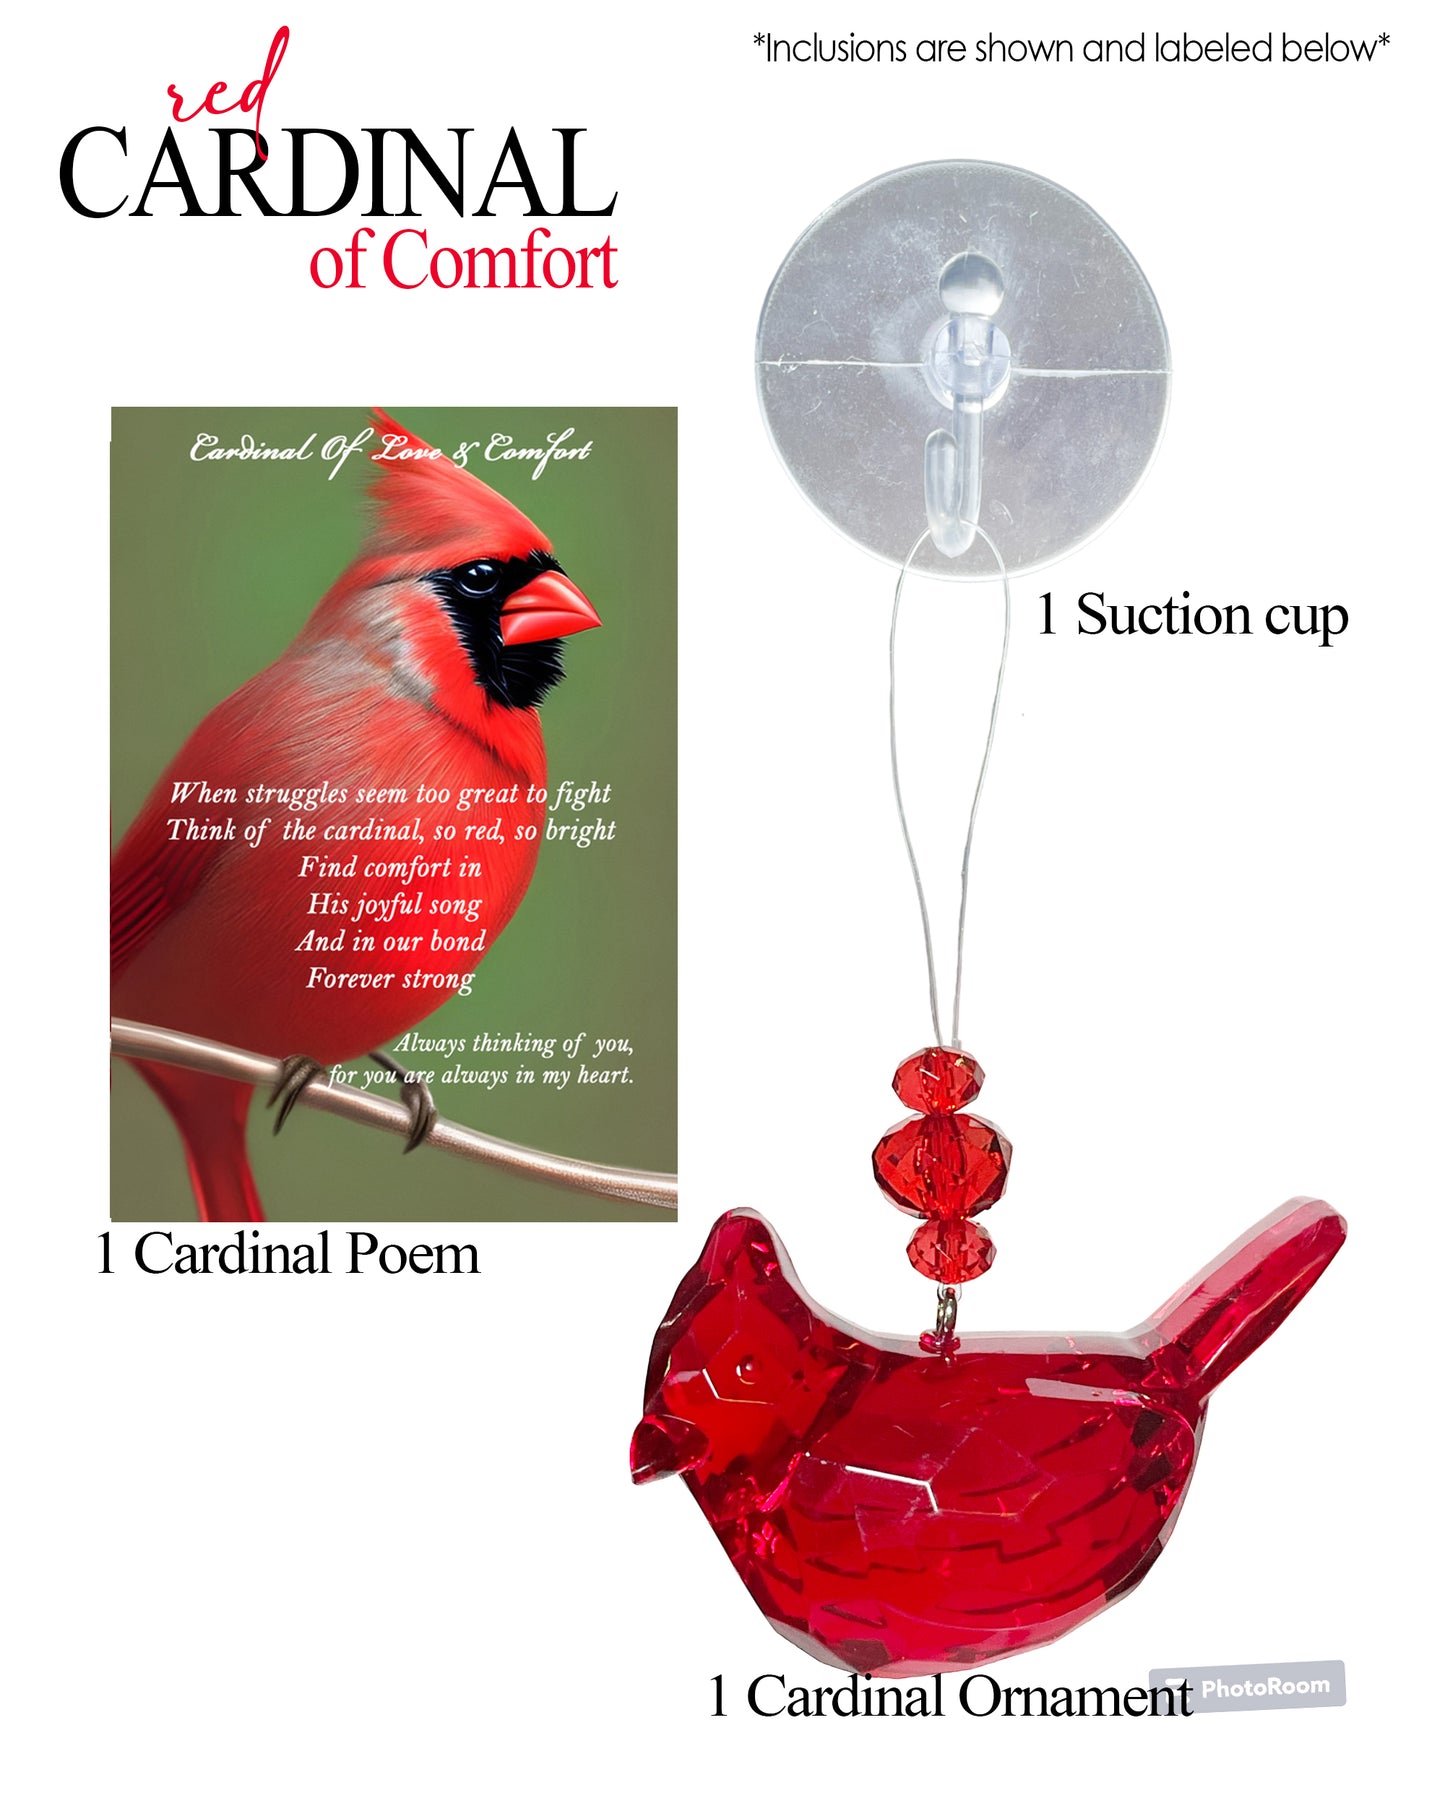 Red Cardinal of Love and Comfort Sympathy Ornament